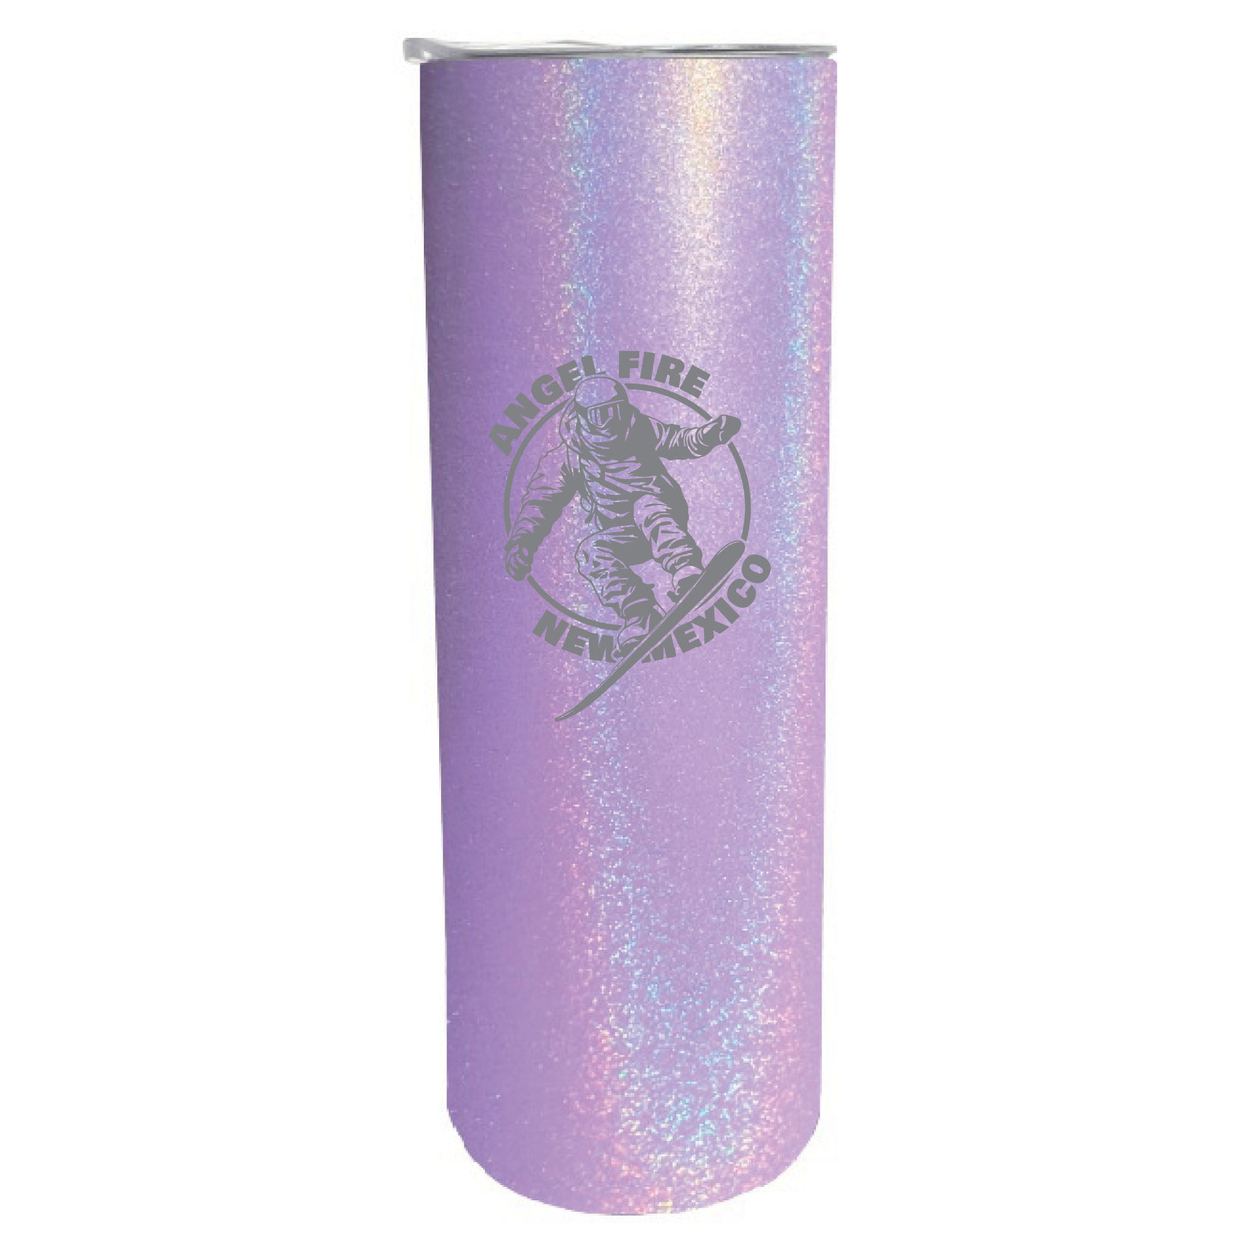 Angel Fire New Mexico Souvenir 20 Oz Engraved Insulated Stainless Steel Skinny Tumbler - Navy,,Single Unit